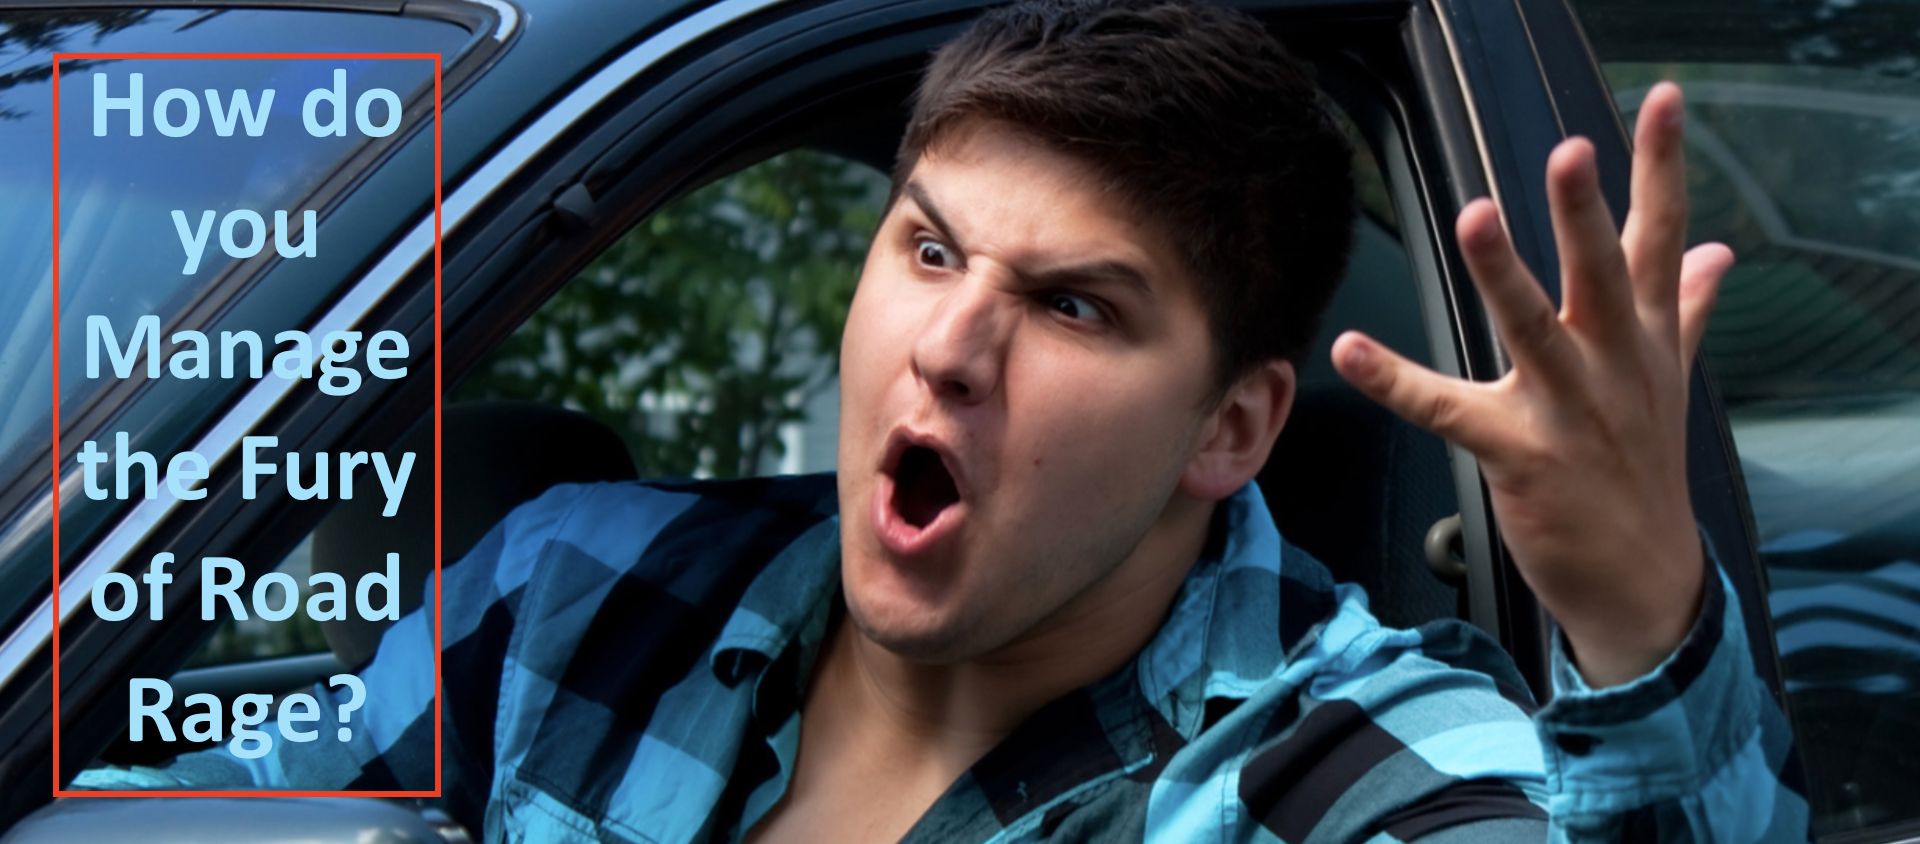 Road Rage – are you guilty of it?